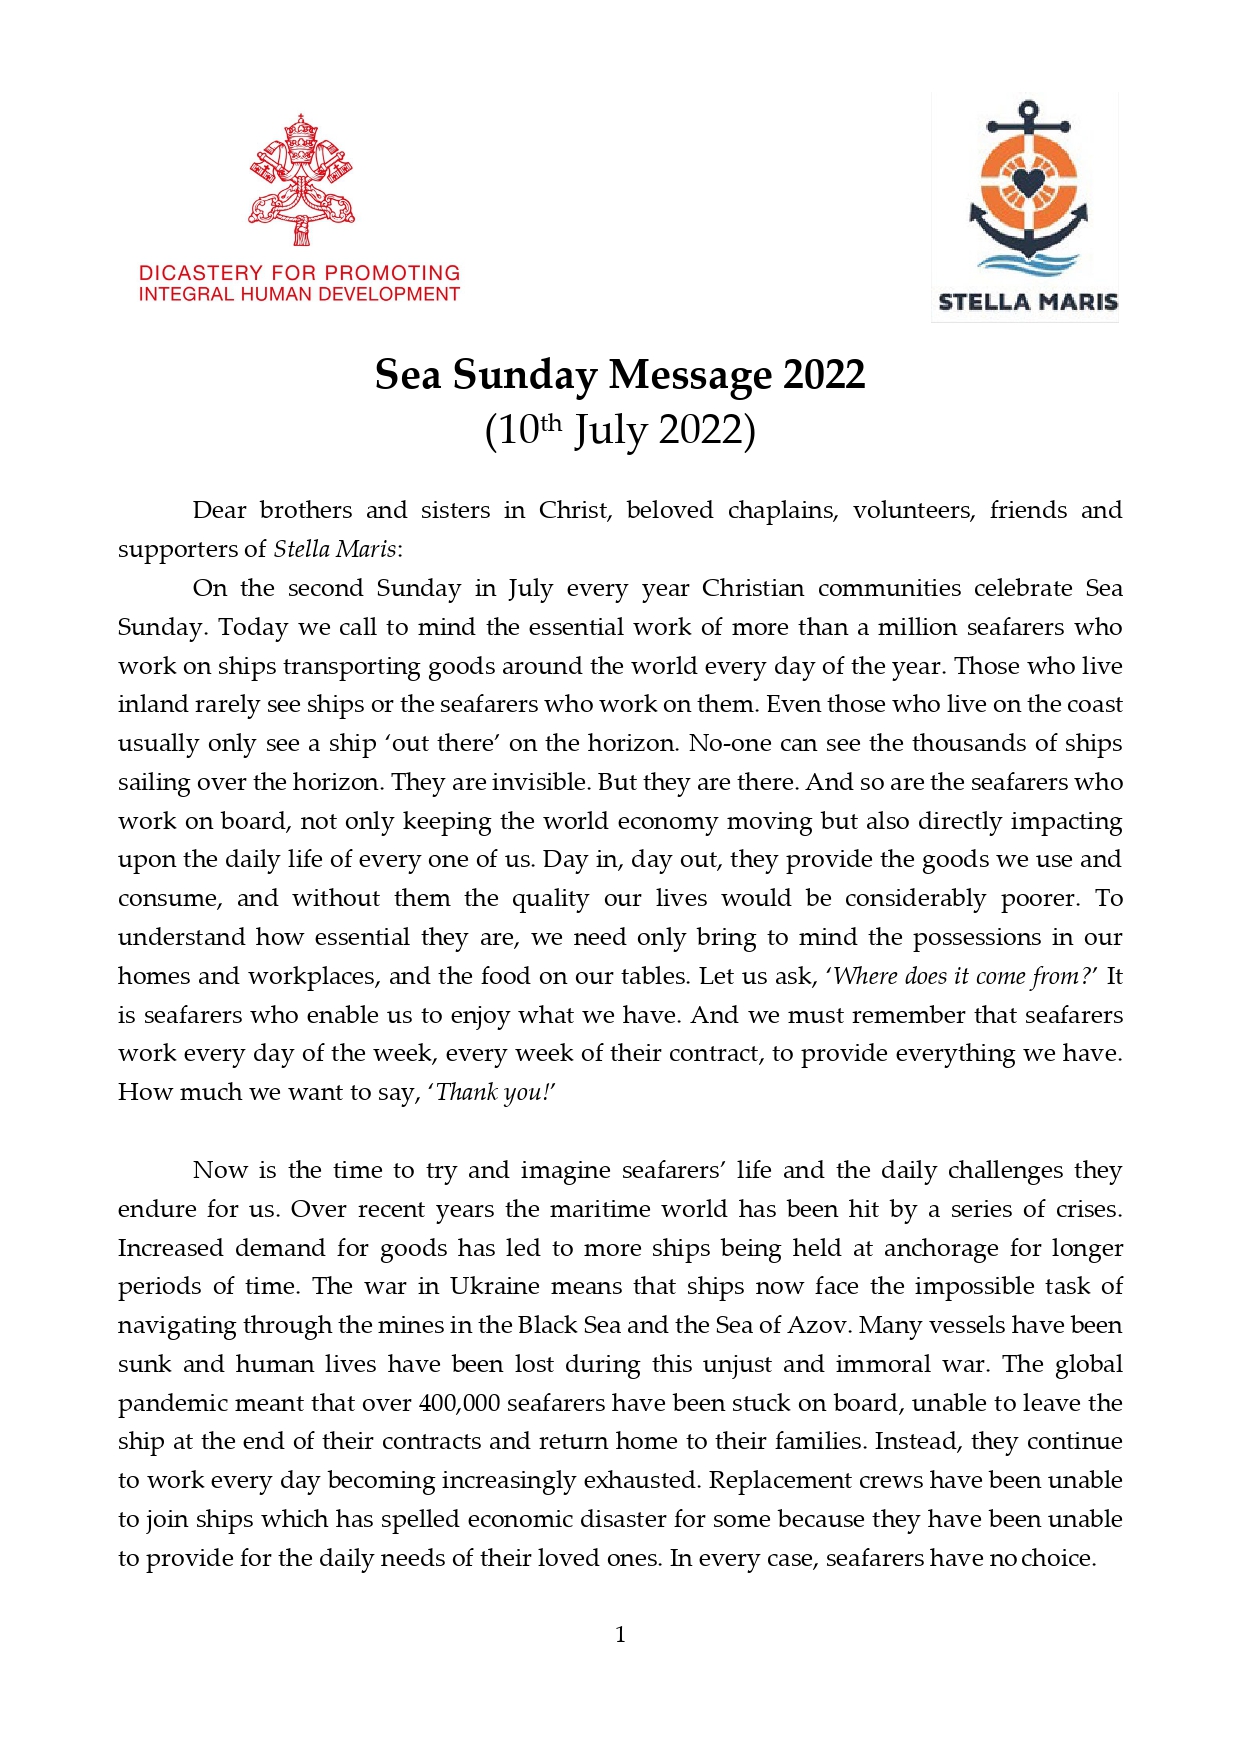 Sea Sunday Message 2022 - ENG_pages-to-jpg-0001.jpg